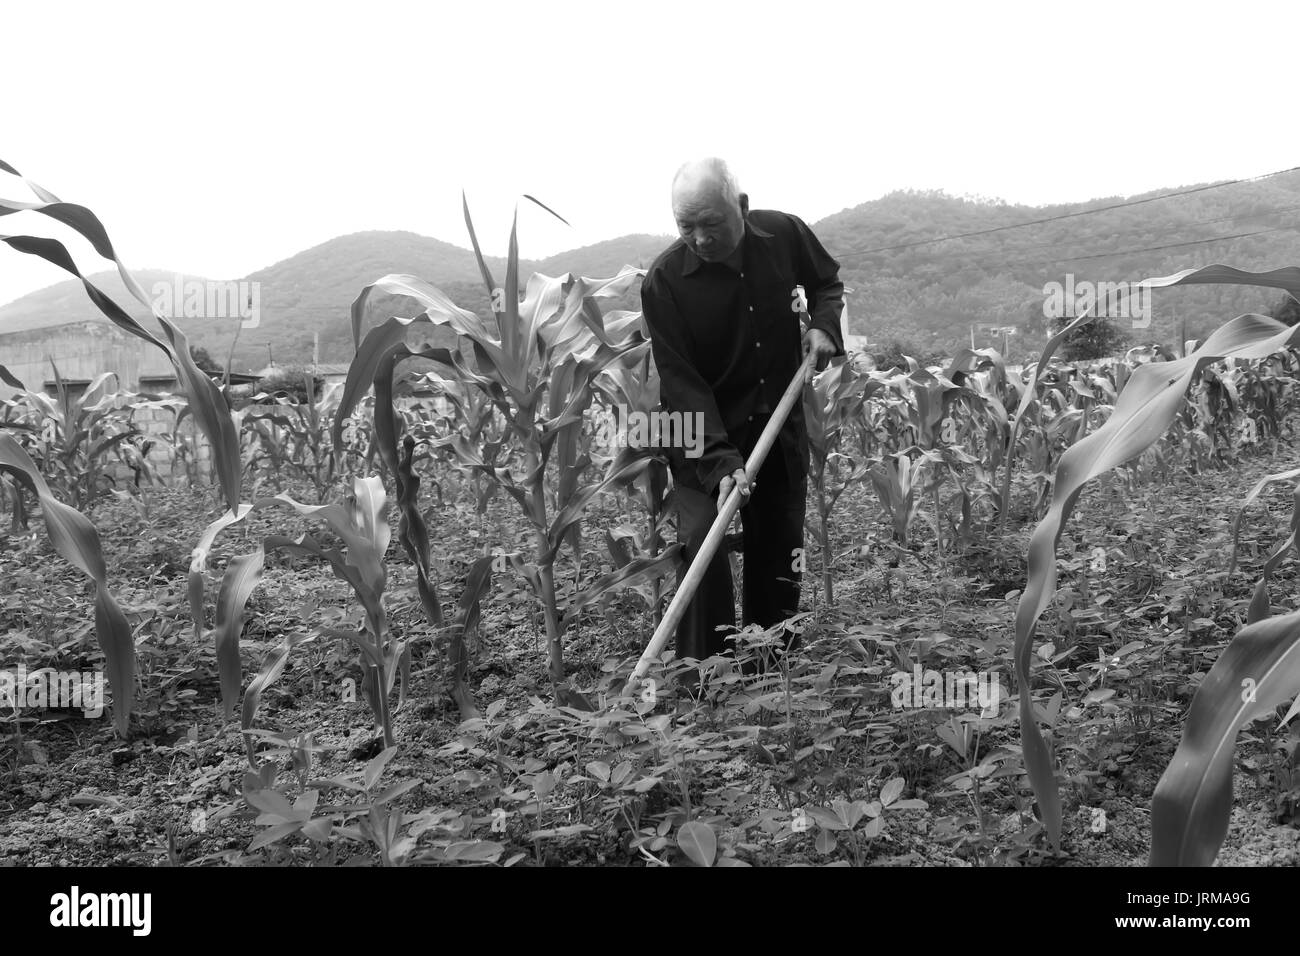 HAI DUONG, VIETNAM, April 20: Old man with a hoe weeding in the corn field on April 20, 2014 in Hai Duong, Vietnam. Stock Photo